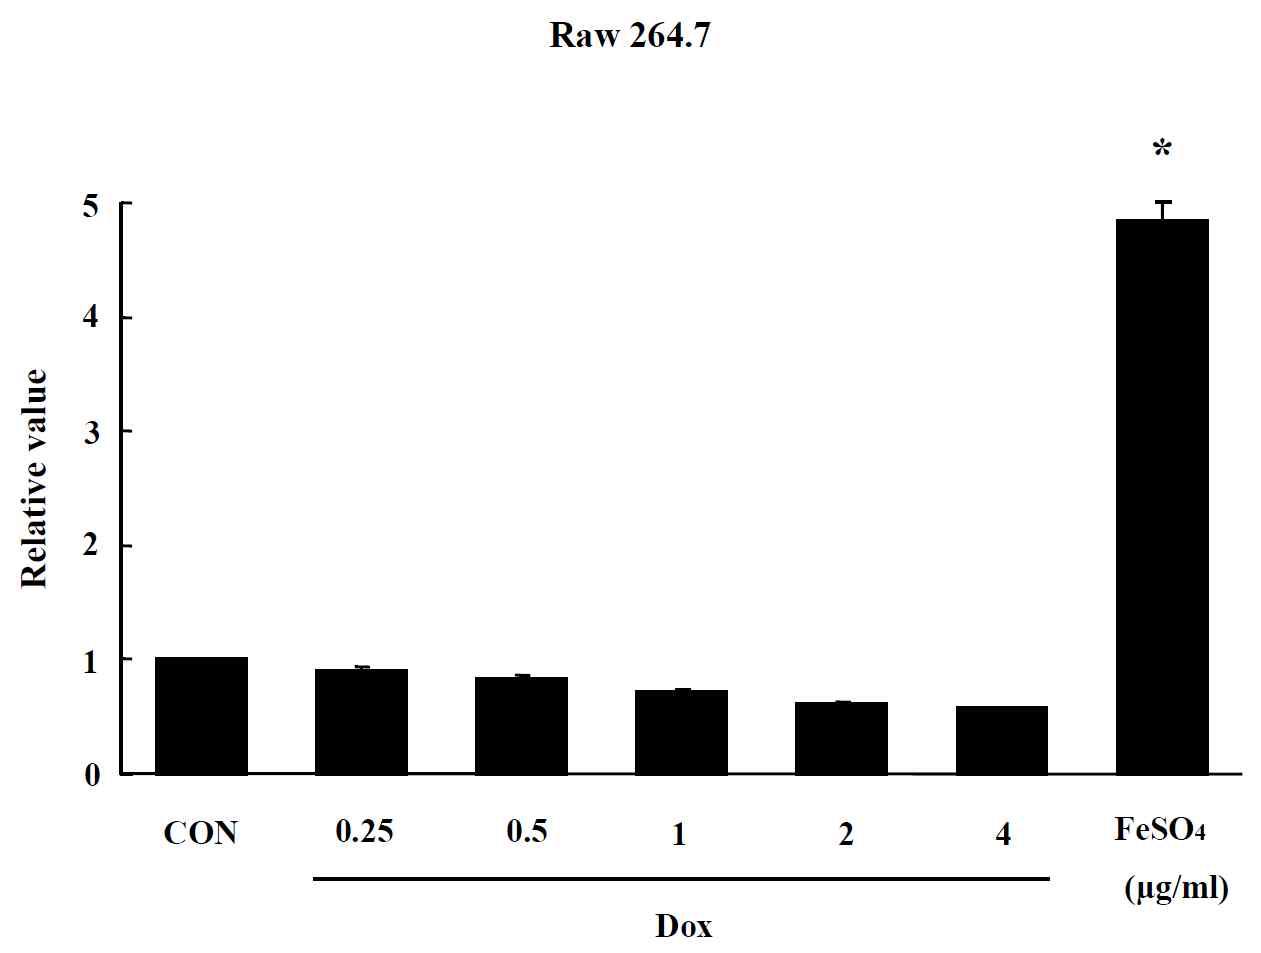 Effect of Dox on oxidative stress in Raw264.7 cells. The level of ROS production was expressed as the relative value of the untreated control group after 24 hr exposure to Dox. Data are shown as means ± SE (n = 5). * p<0.05, significantly different from the control